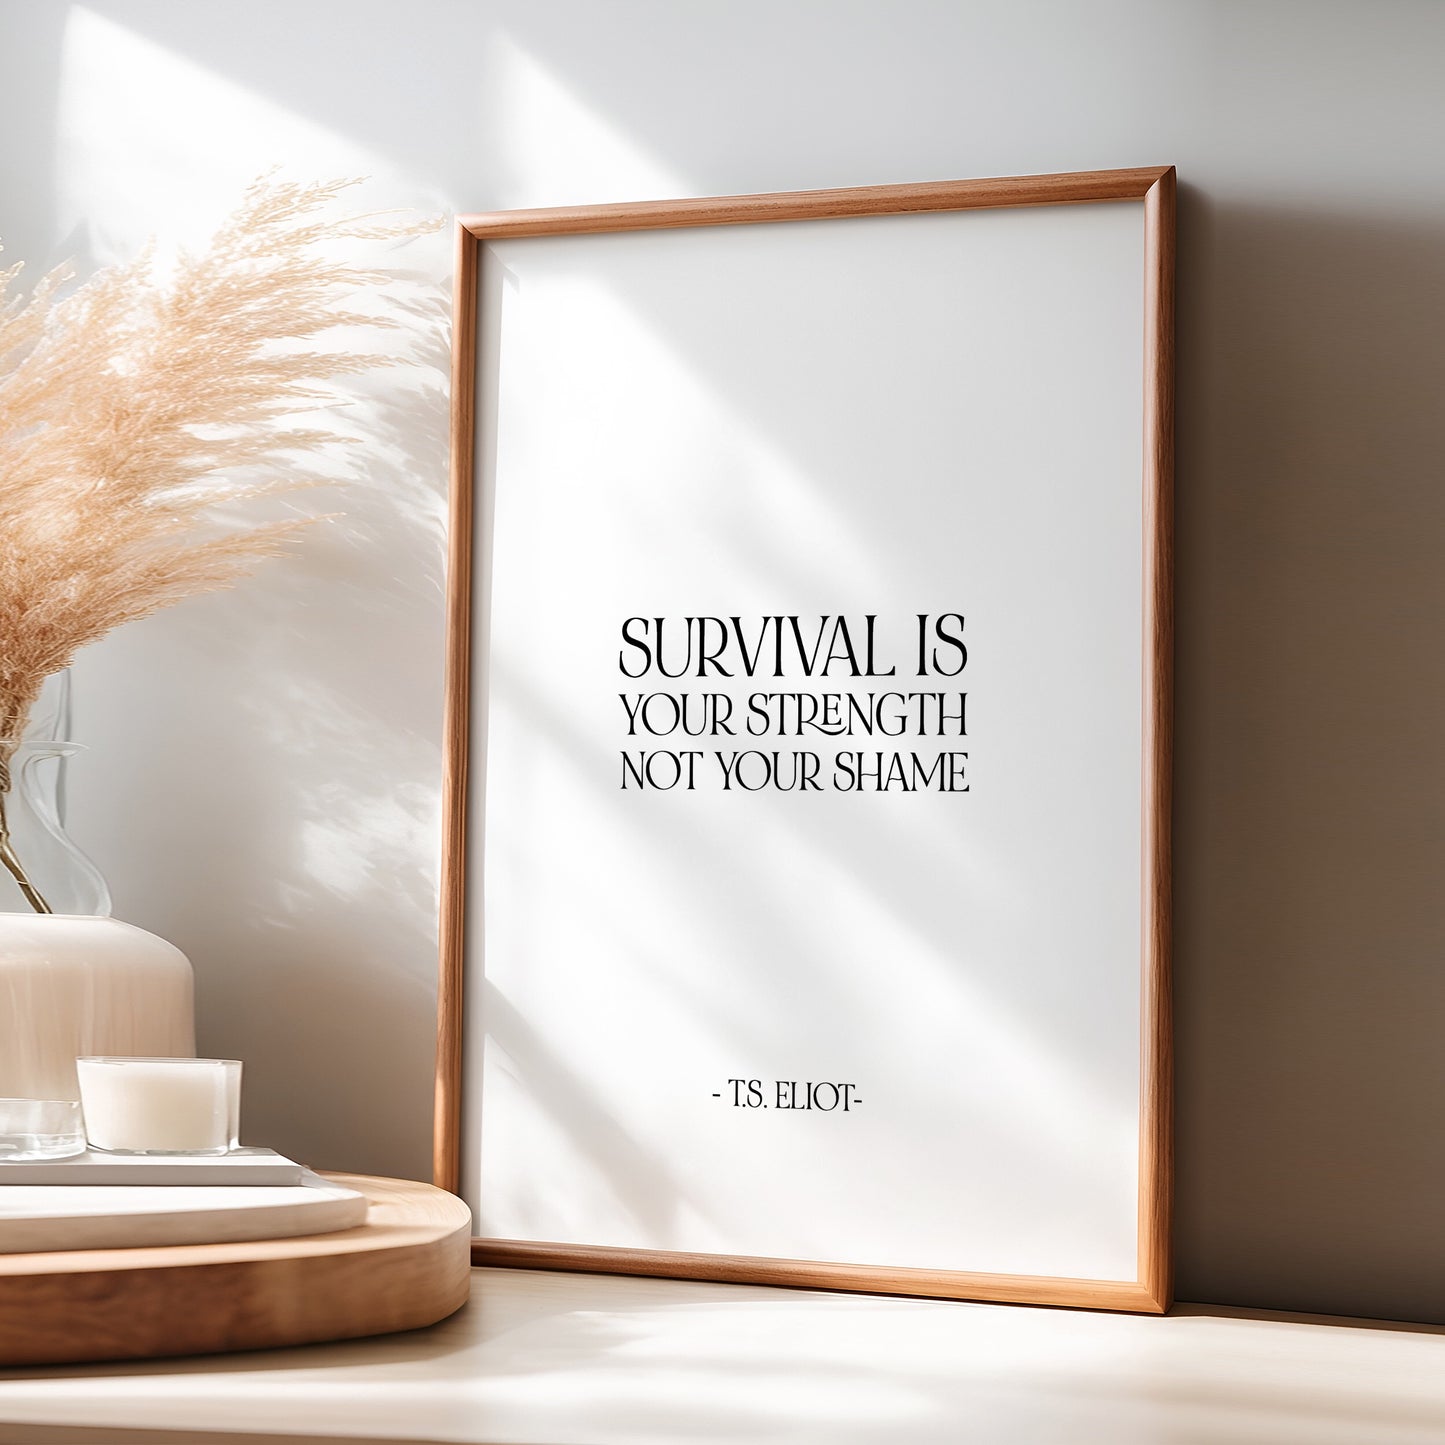 Survival is your strength not your shame,T. S. Eliot quote,Inspirational print,Motivational quote,Encouragement gift,Empowerment saying